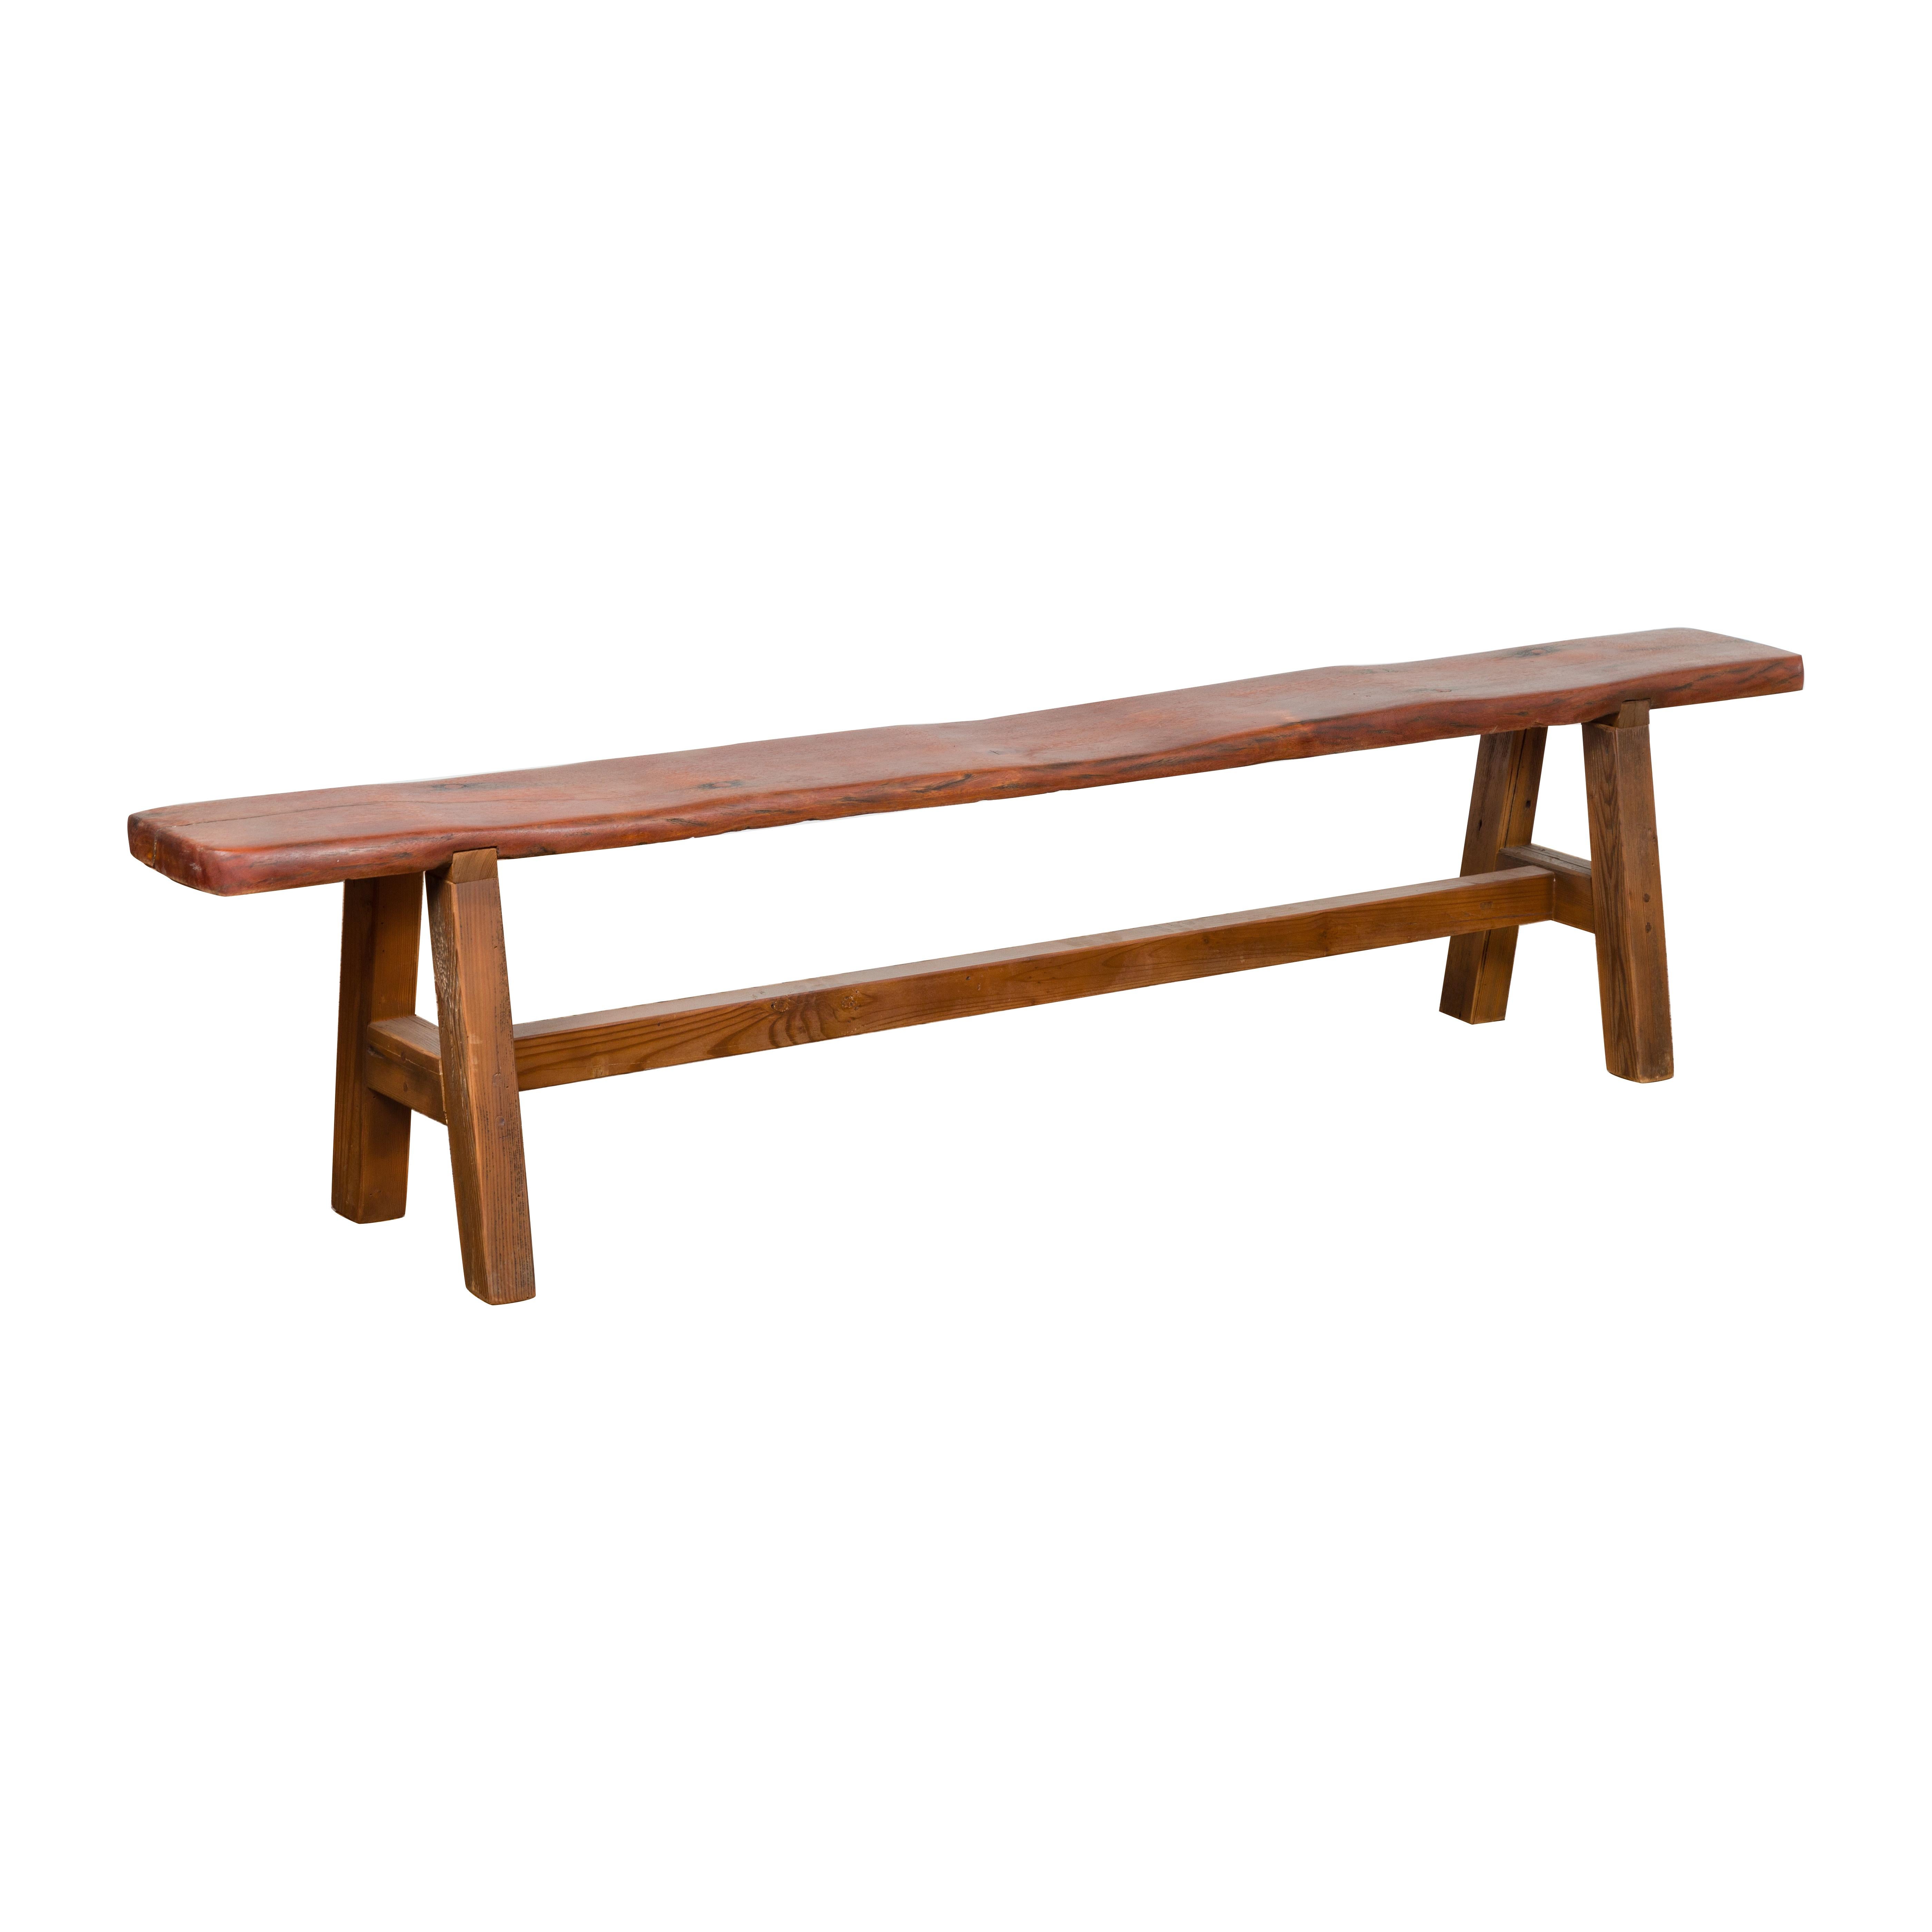 Rustic Long A-Frame Wooden Bench with Cross Stretcher and Splaying Legs For Sale 7